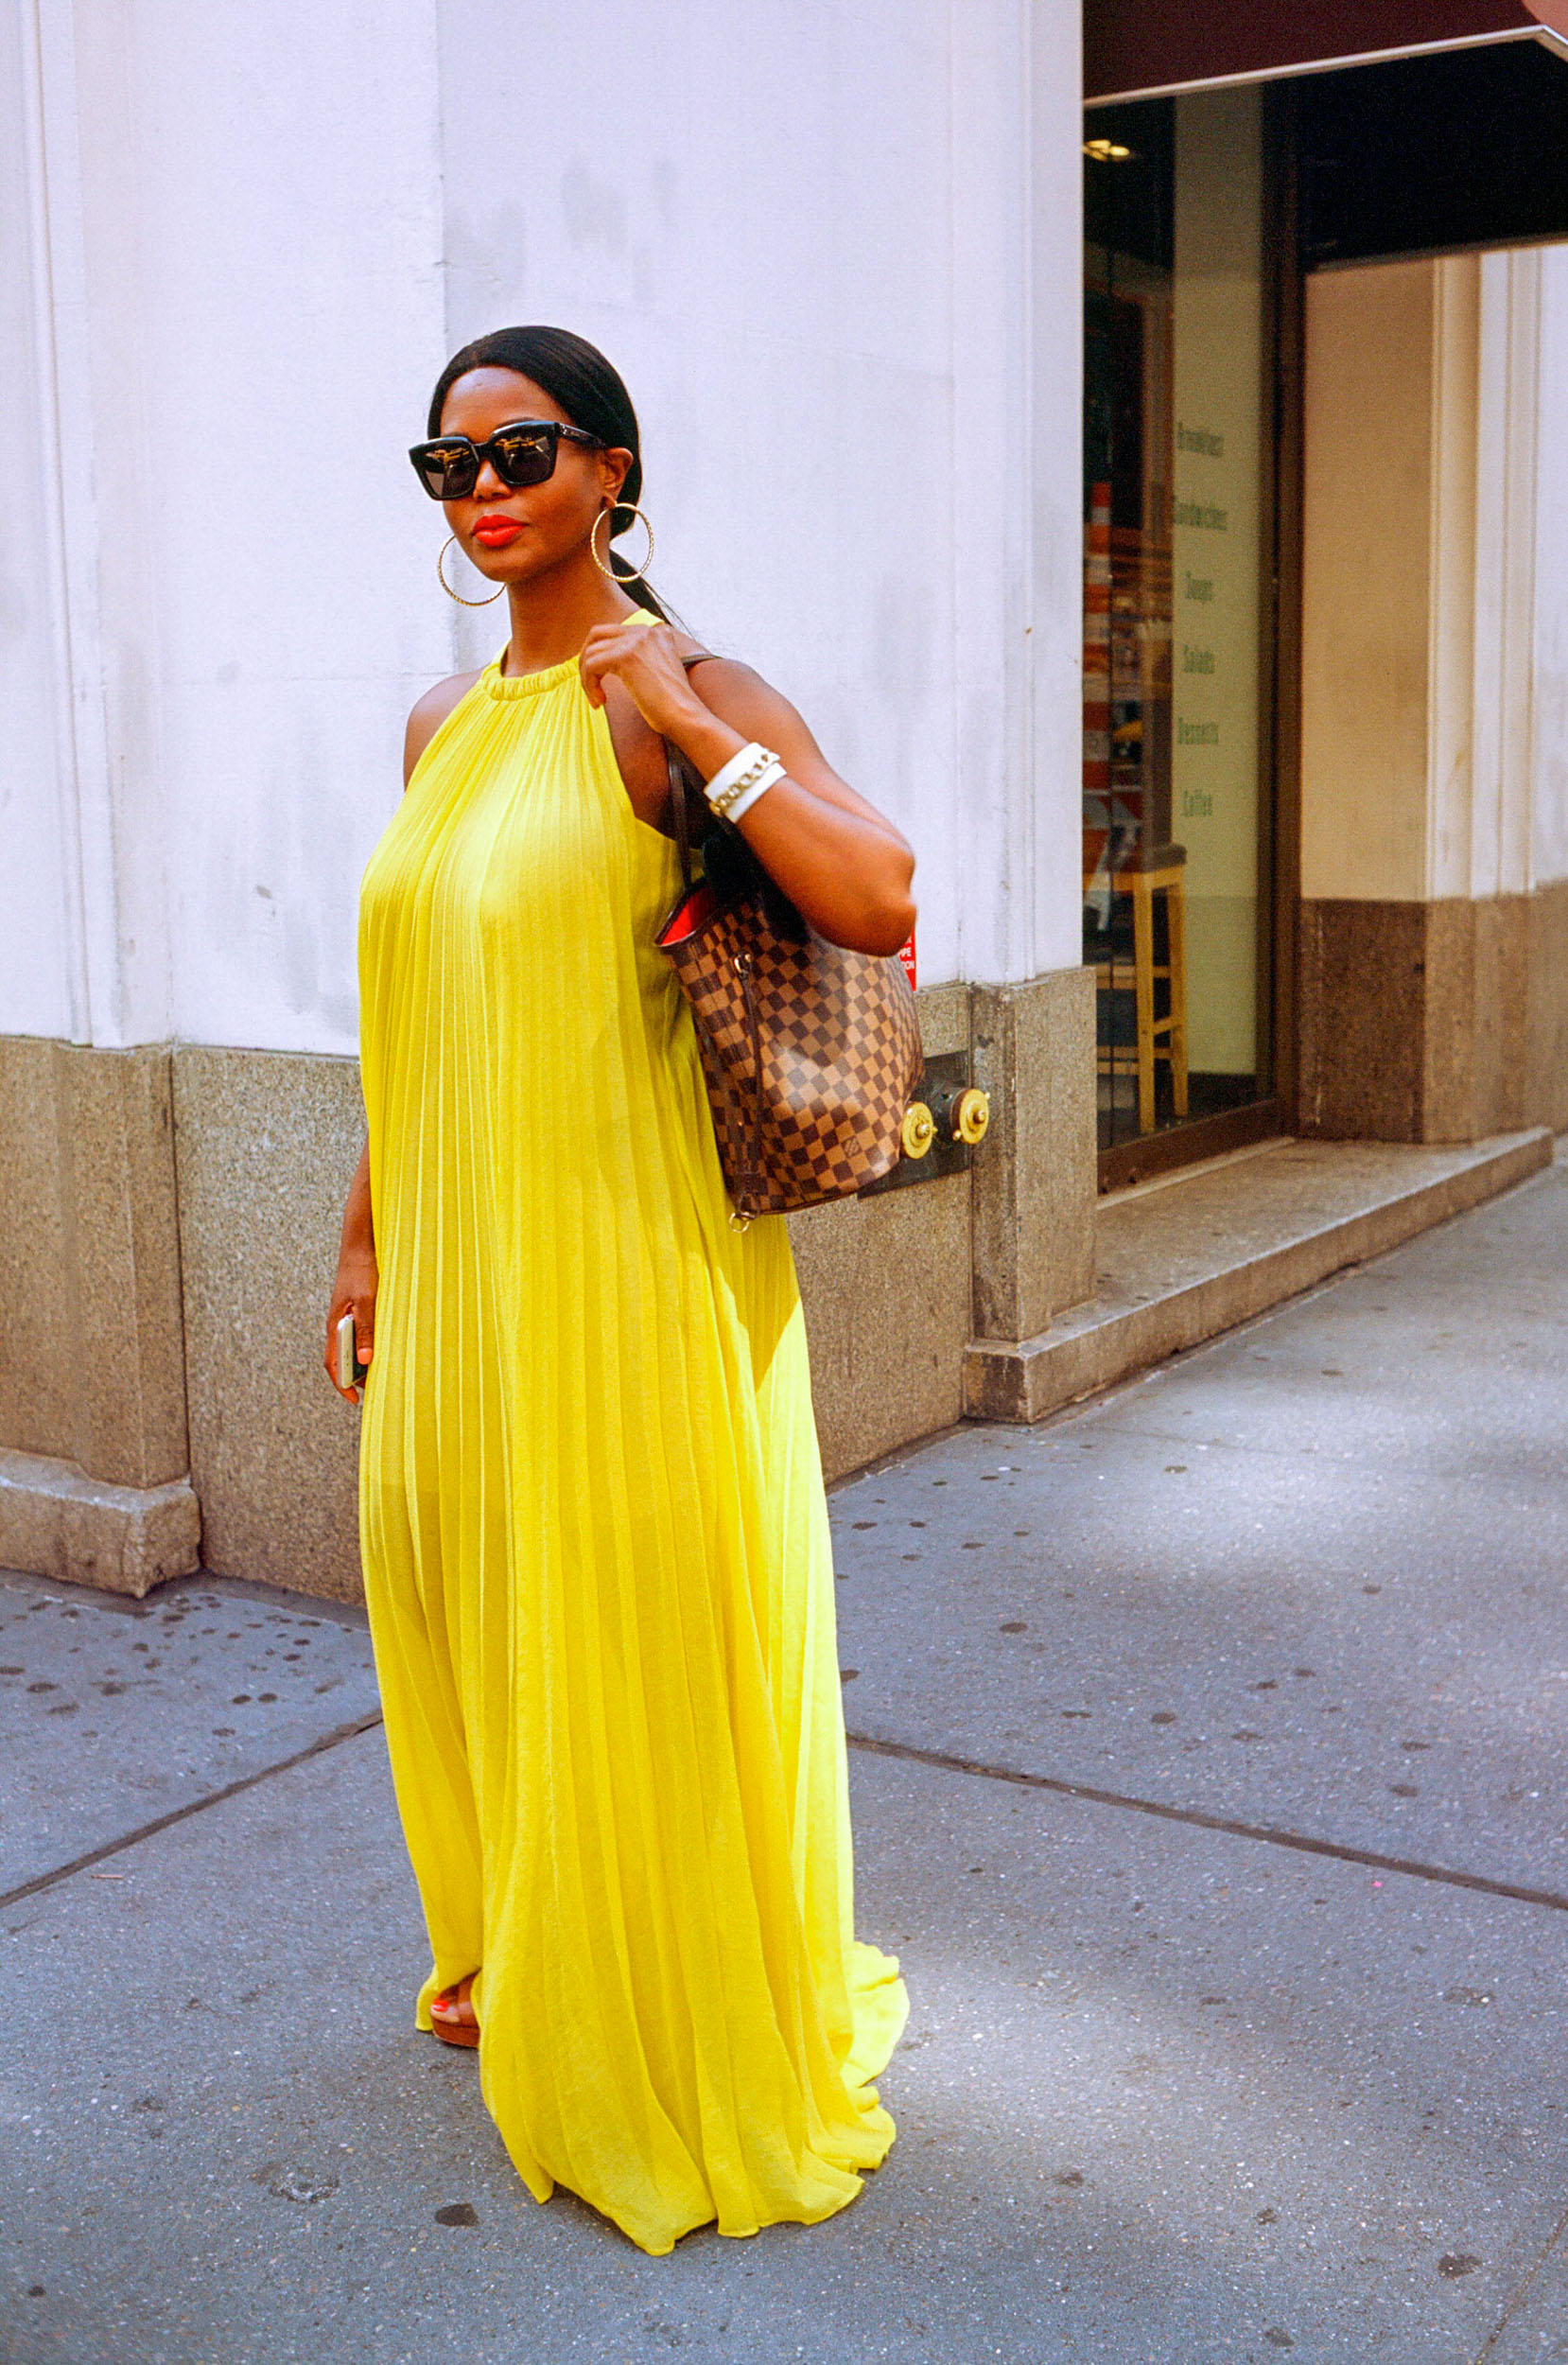 A-STREET-PORTRAIT-OF-A-WOMAN-IN-A-YELLOW-DRESS-IN-NEW-YORK-CITY